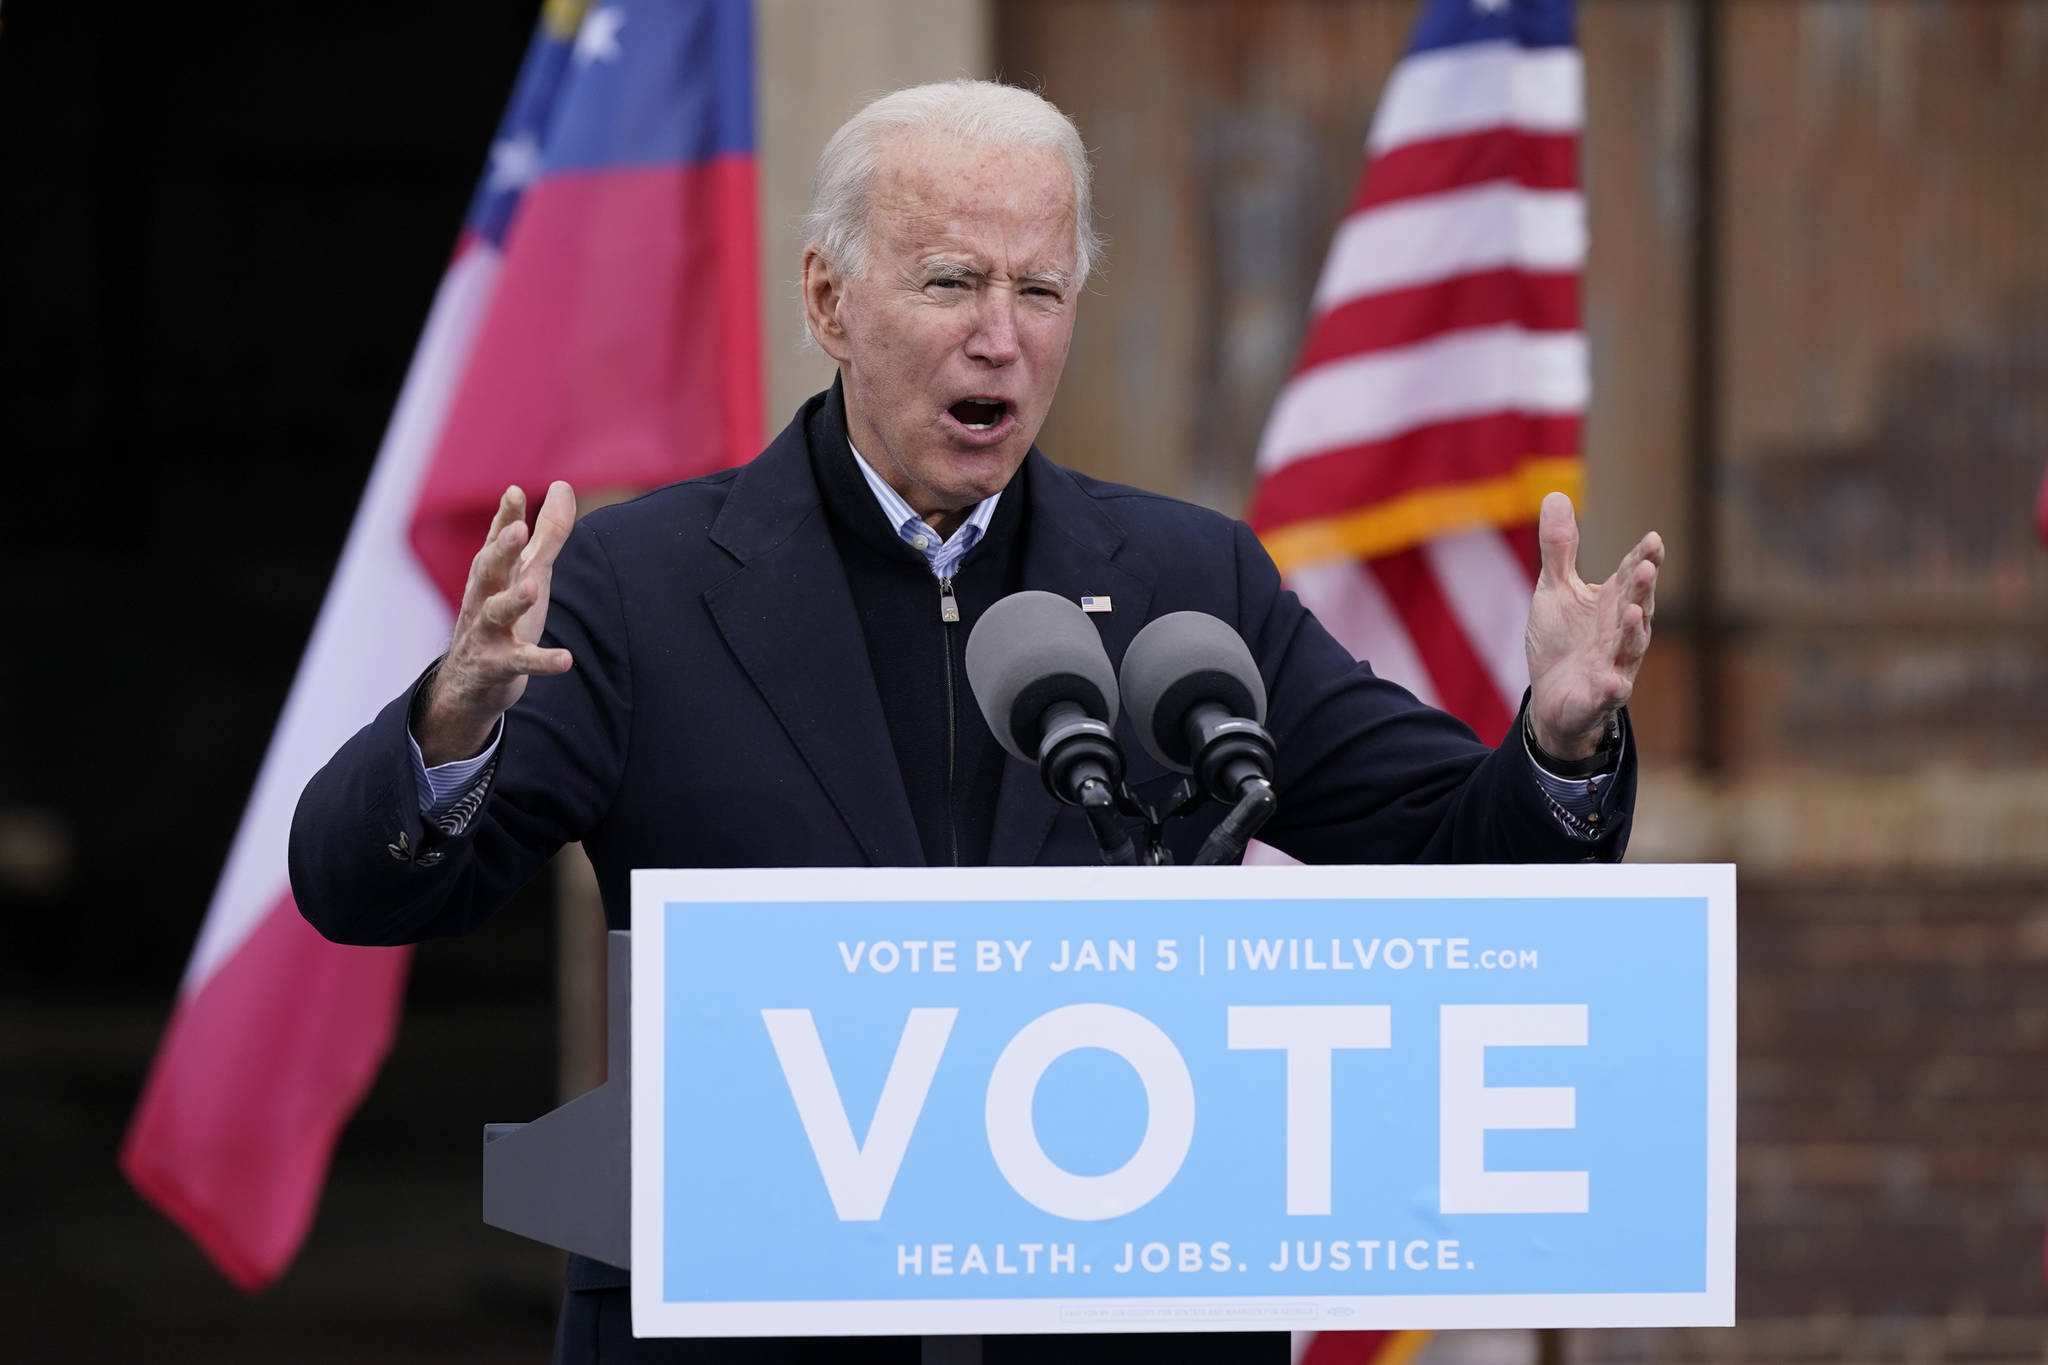 President-elect Joe Biden speaks at a drive-in rally for Georgia Democratic candidates for U.S. Senate Raphael Warnock and Jon Ossoff, in Atlanta. The first full week of 2021 is shaping up to be one of the biggest of Biden’s presidency. And he hasn’t even taken office yet. (AP Photo/Patrick Semansky, File)